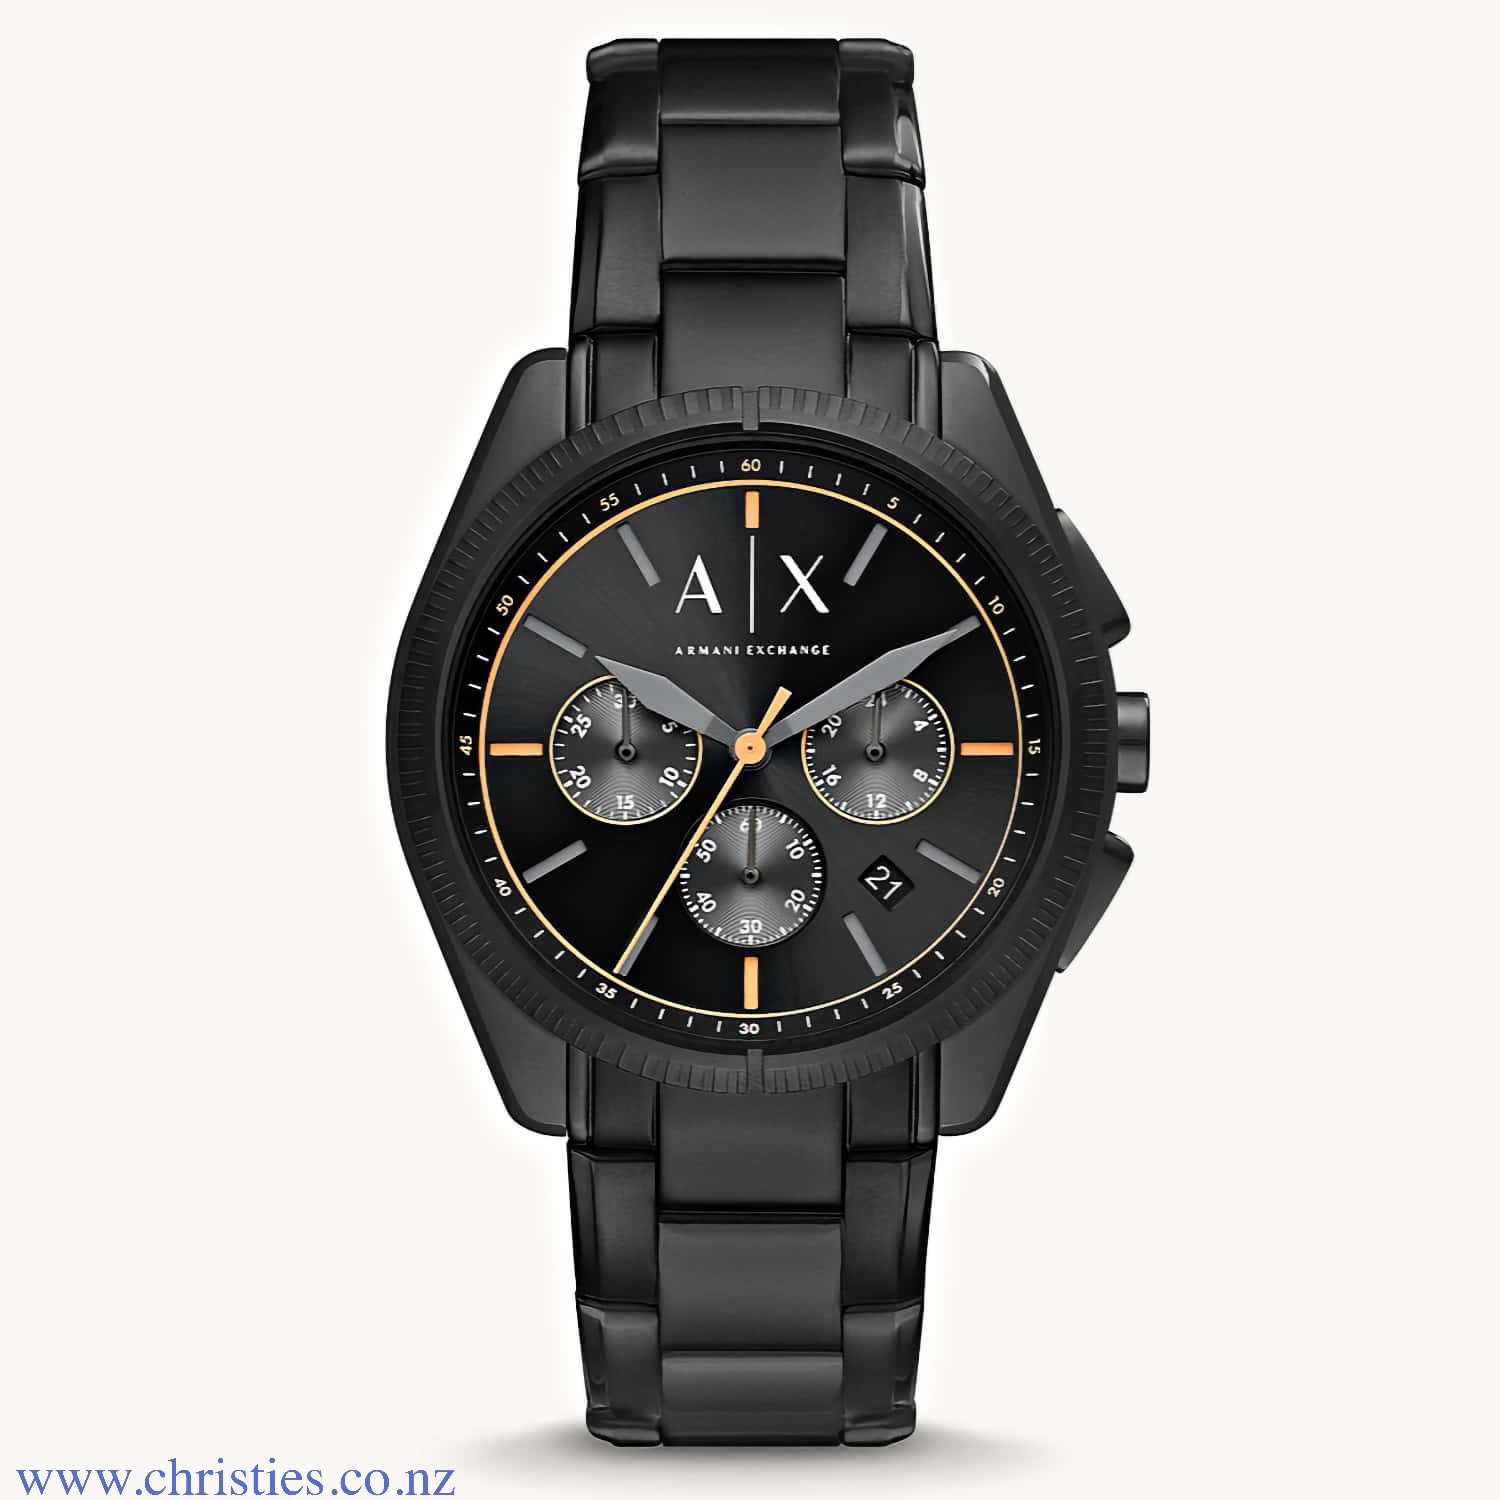 AX2852 A|X  Armani Exchange  Chronograph All Black Watch. The Armani Exchange Giacomo AX2850 is a practical and attractive gents watch. Case is made out of stainless steel with a  blue dial. LAYBUY - Pay it easy, in 6 weekly payments and have it now. Only